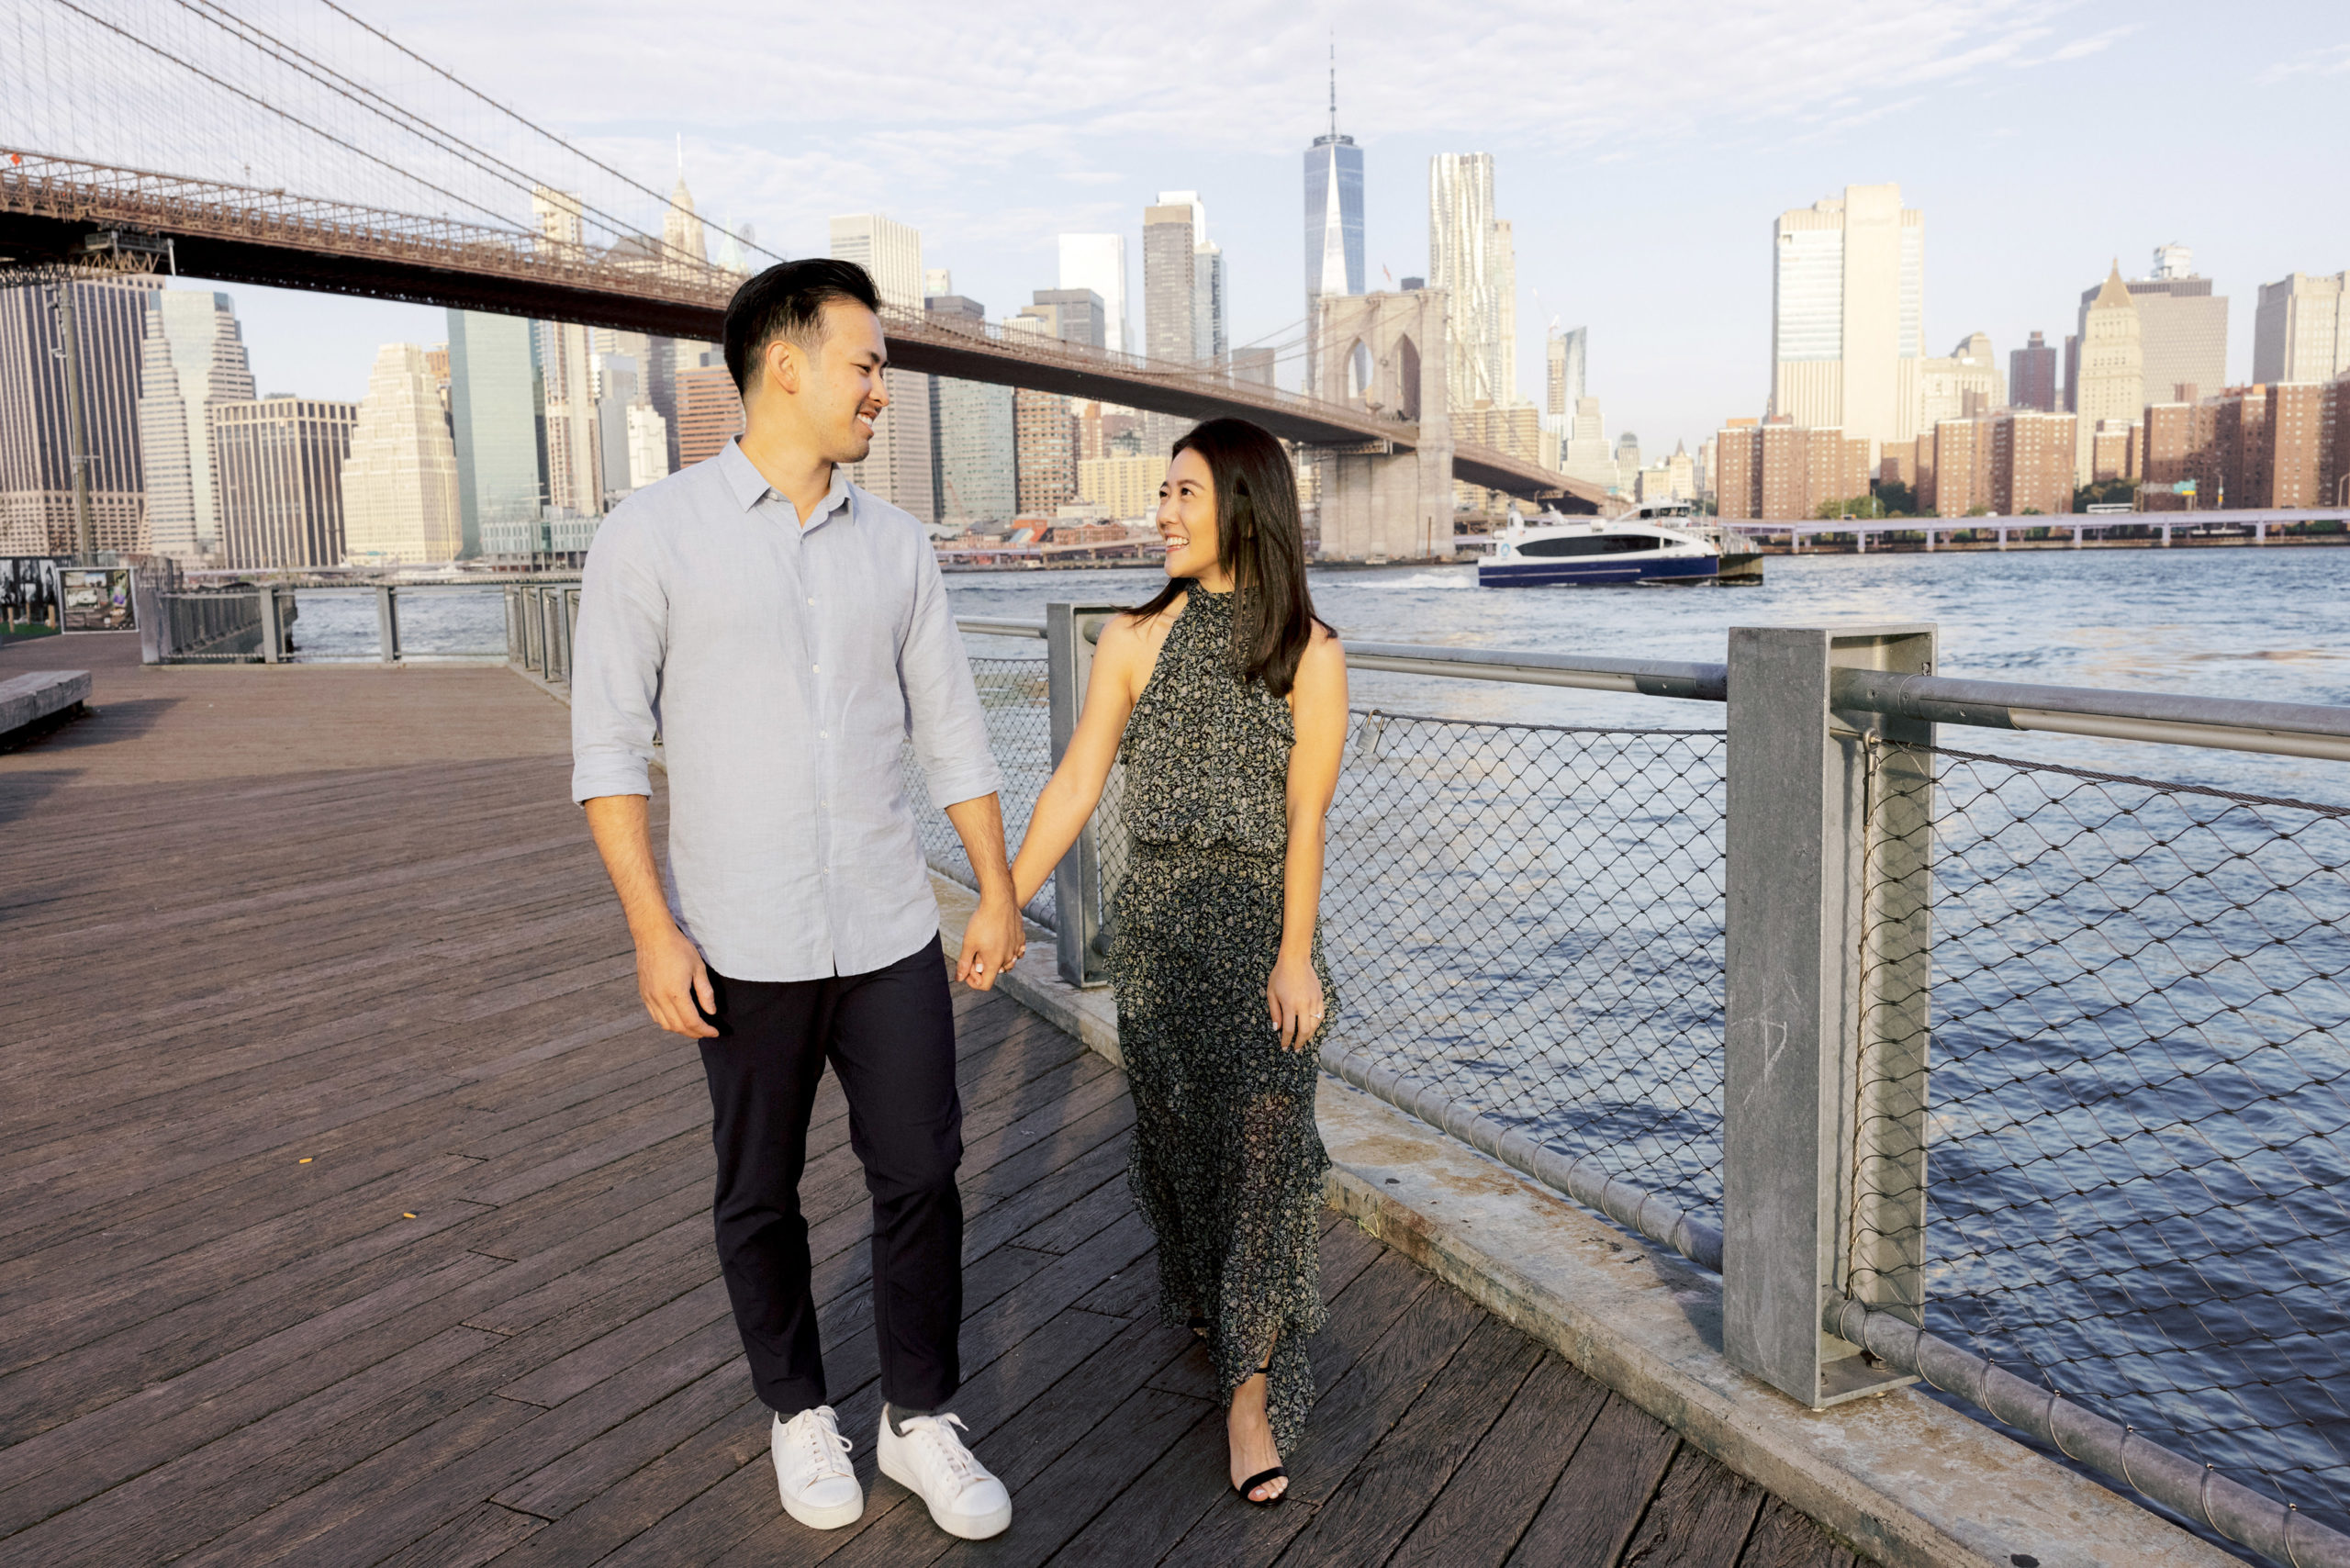 The engaged couple are walking happily with the Brooklyn Bridge in the background. Image by Jenny Fu Studio